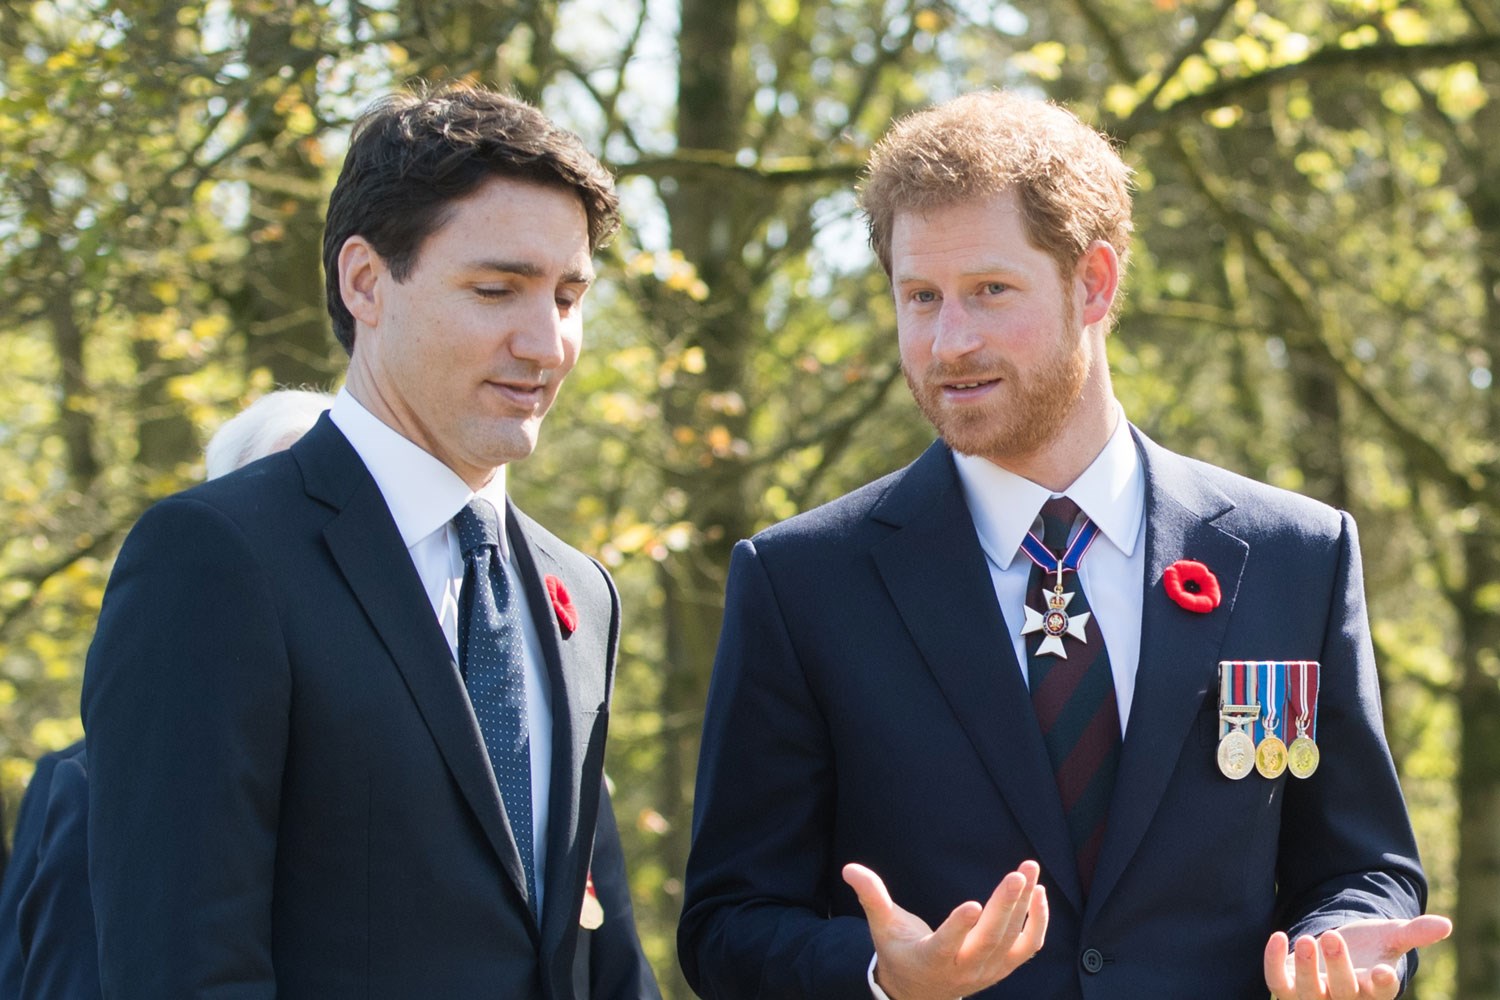 Justin Trudeau Has Welcomed The Duke And Duchess Of Sussex To Canada